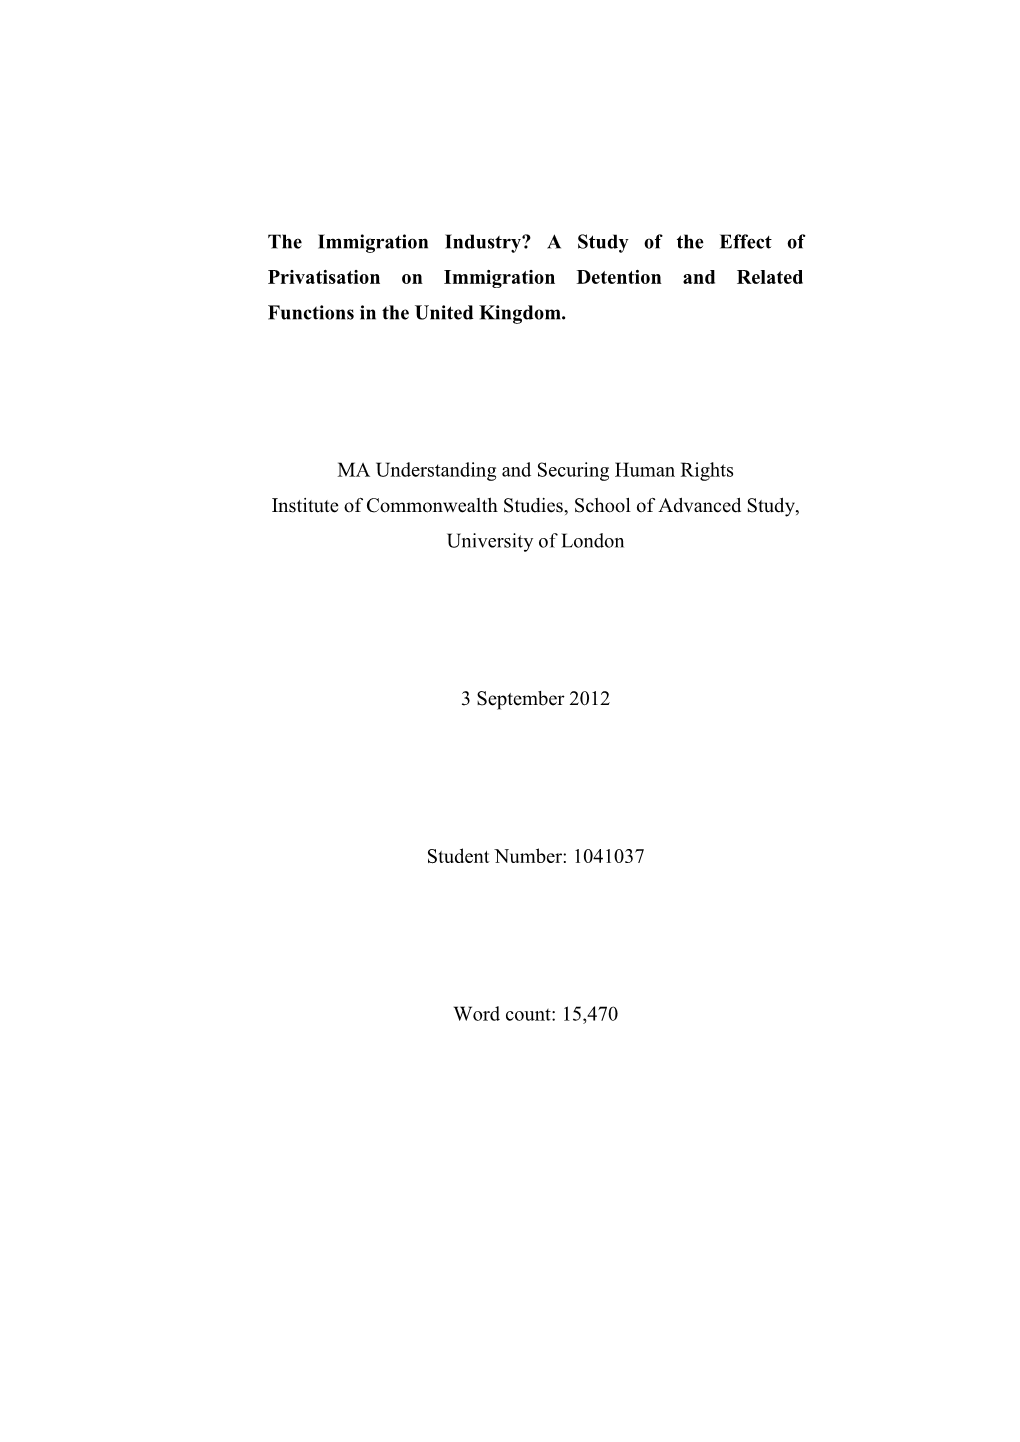 A Study of the Effect of Privatisation on Immigration Detention and Related Functions in the United Kingdom